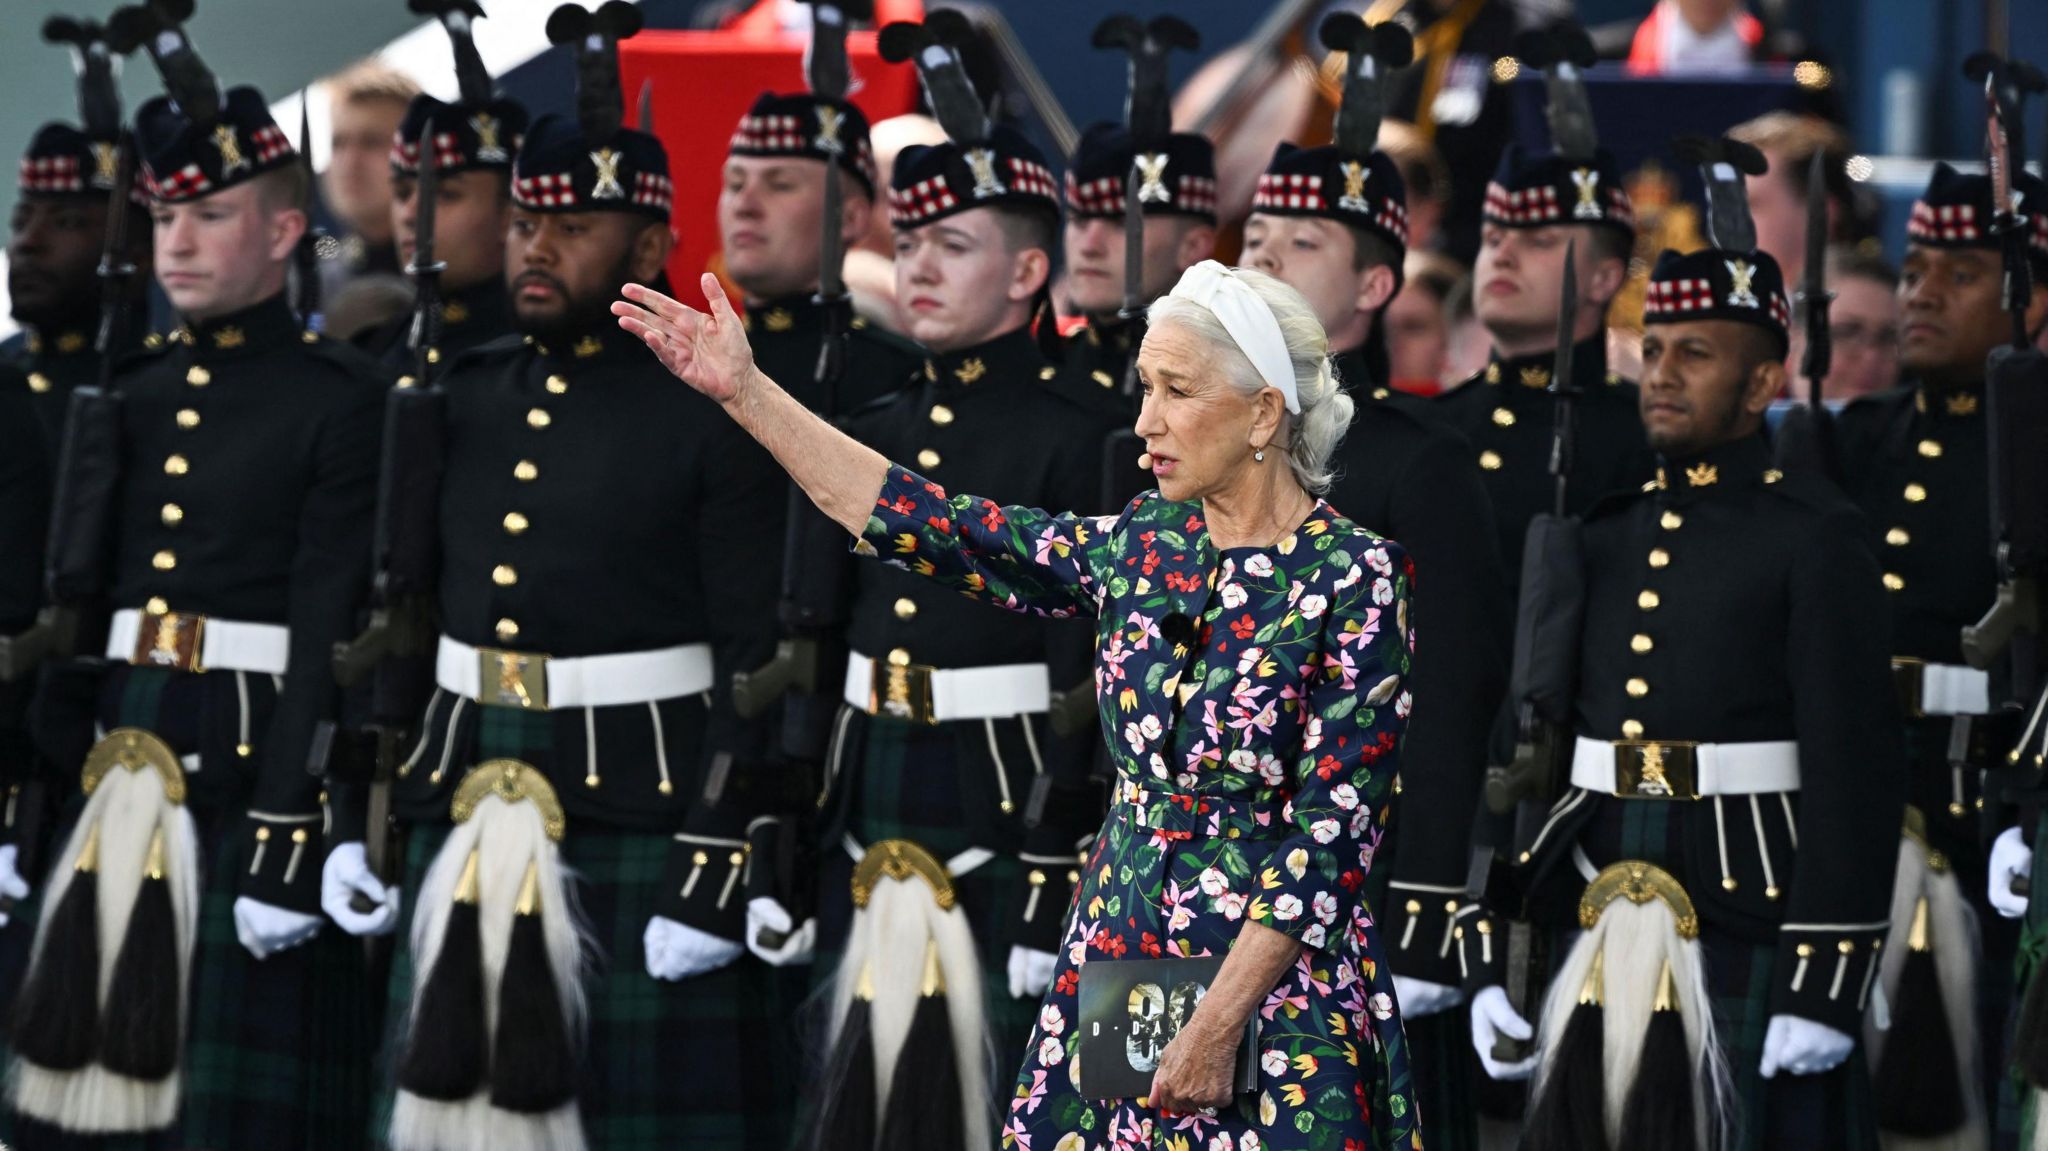 Dame Helen Mirren hosting the event at Southsea Portsmouth, stood on stage in front of soldiers